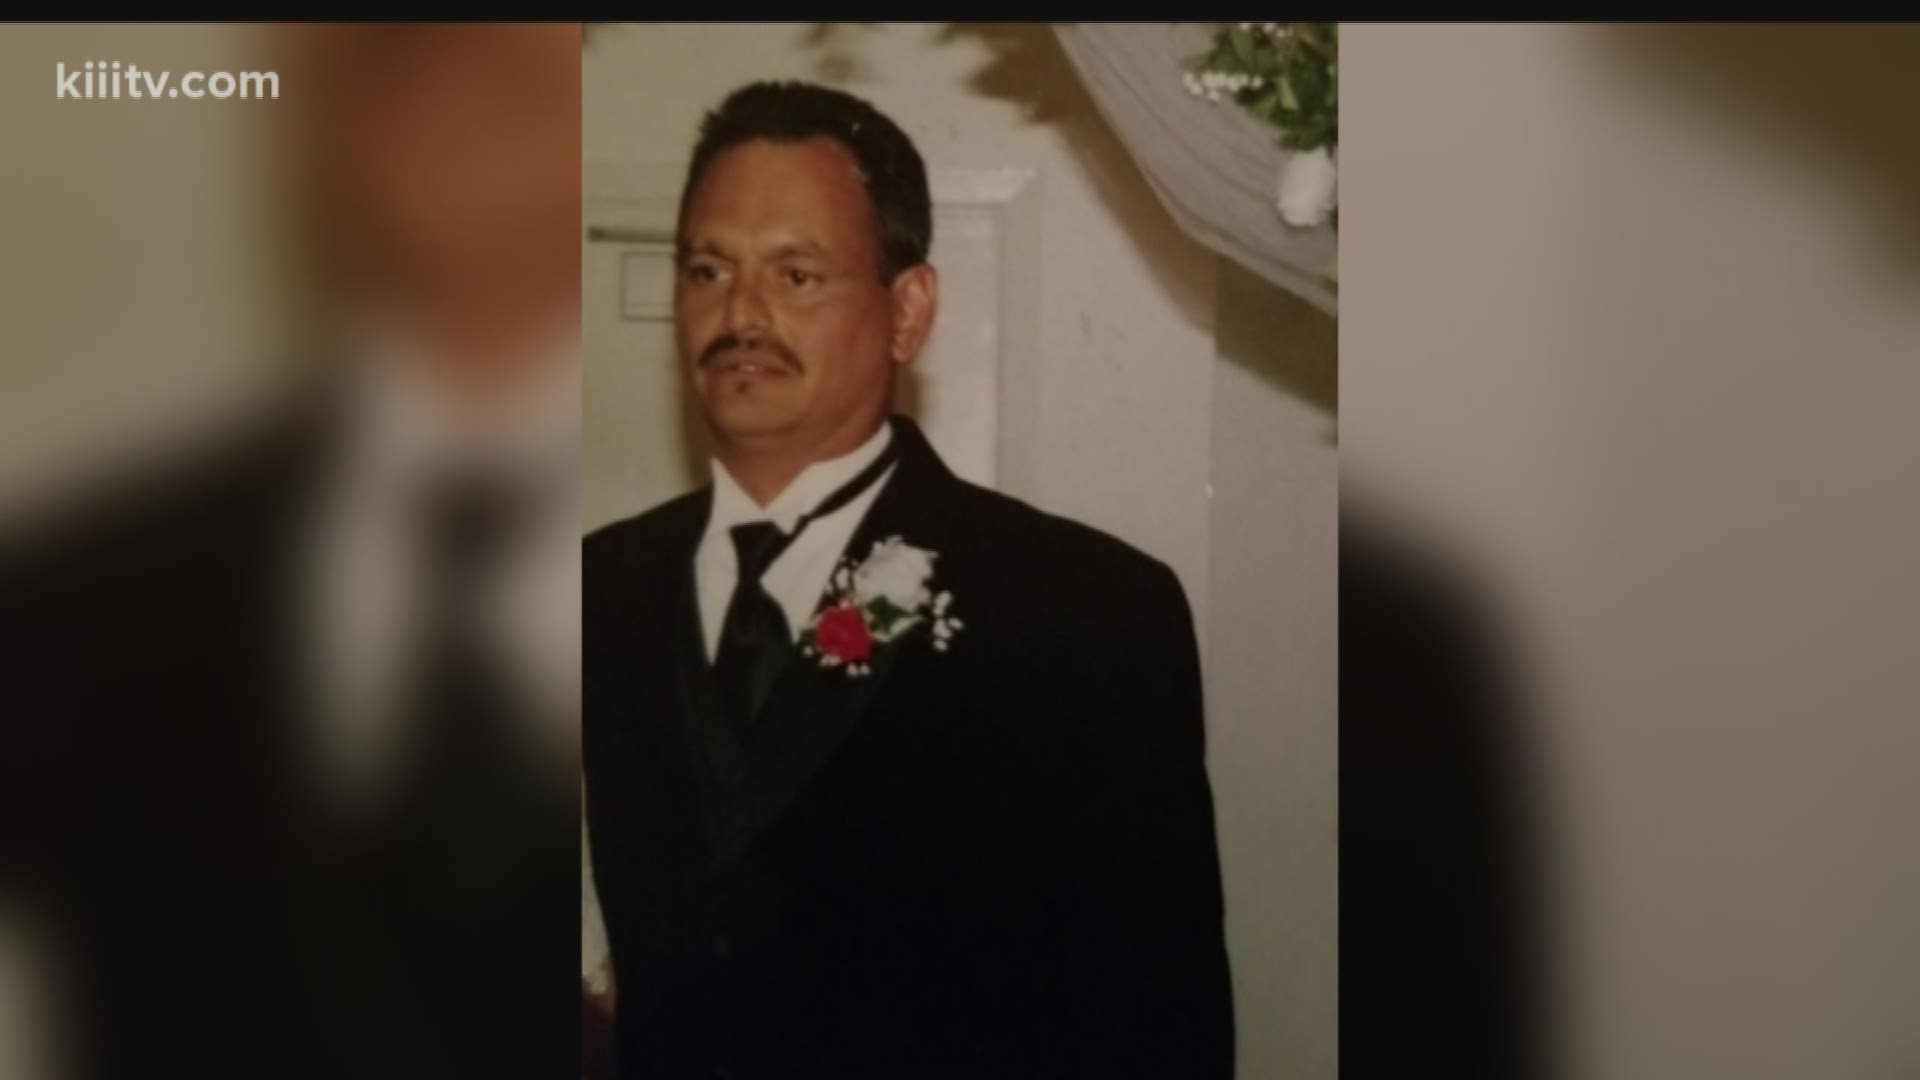 It was on March 11, 2005, when authorities arrived and found Gonzales at a trailer home in the Blueberry Hill's subdivision with a bullet wound to the head.